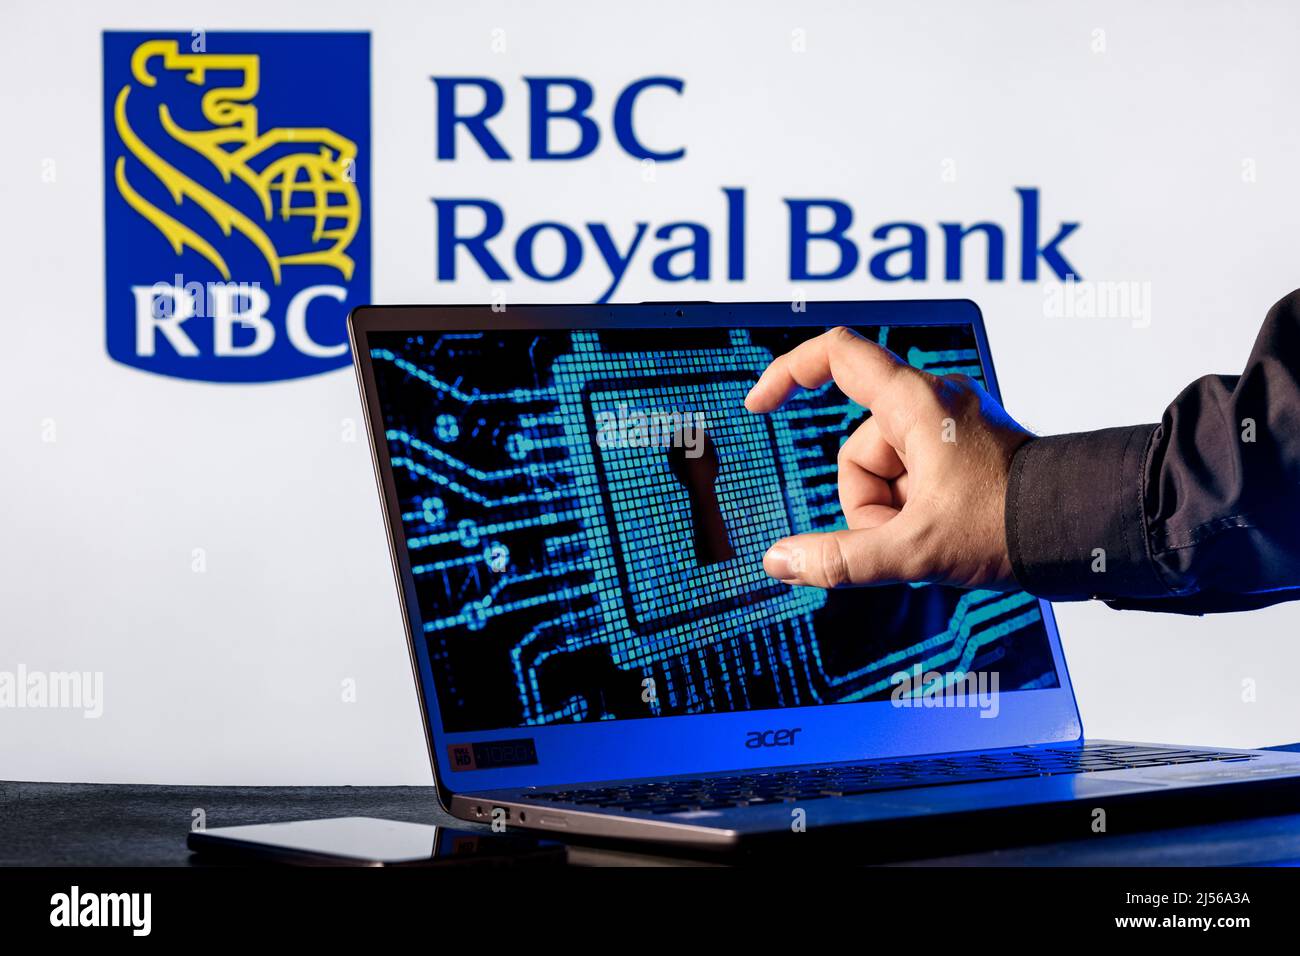 Laptop with lock symbol on screen on background of Royal Bank of Canada logo. Finger points to lock symbol. Concept of data hacking. Stock Photo